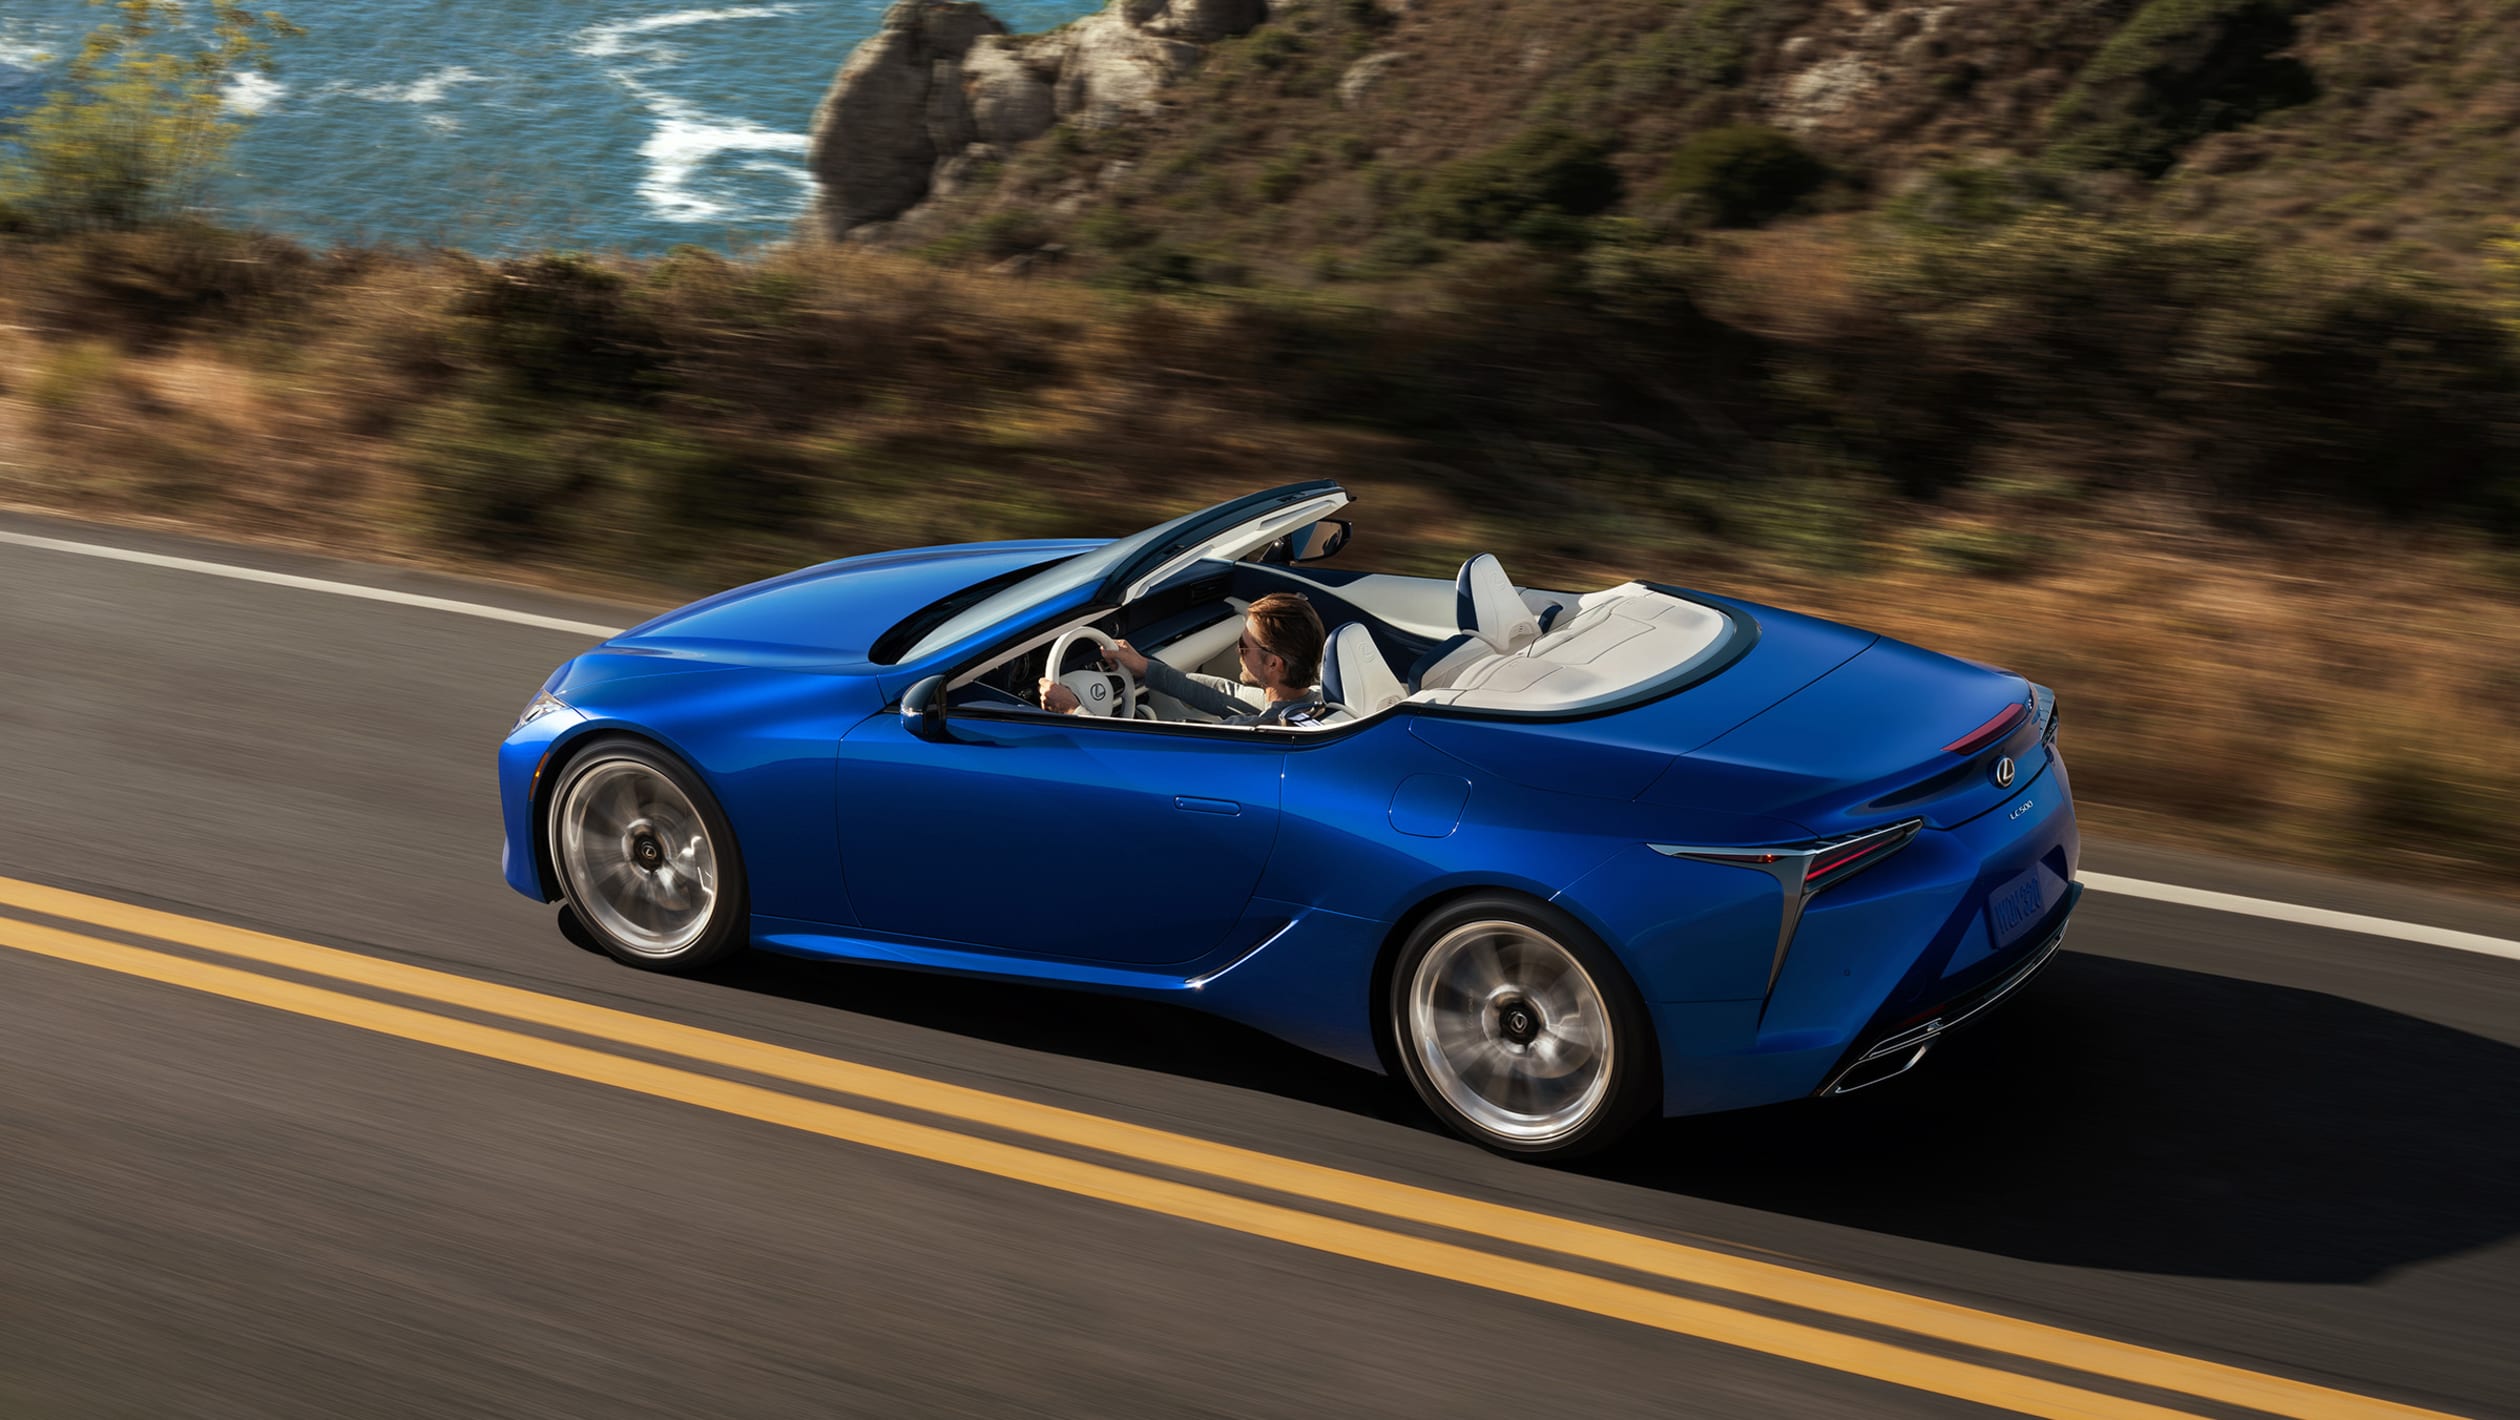 2020 Lexus LC500 Convertible makes its debut pictures Carbuyer